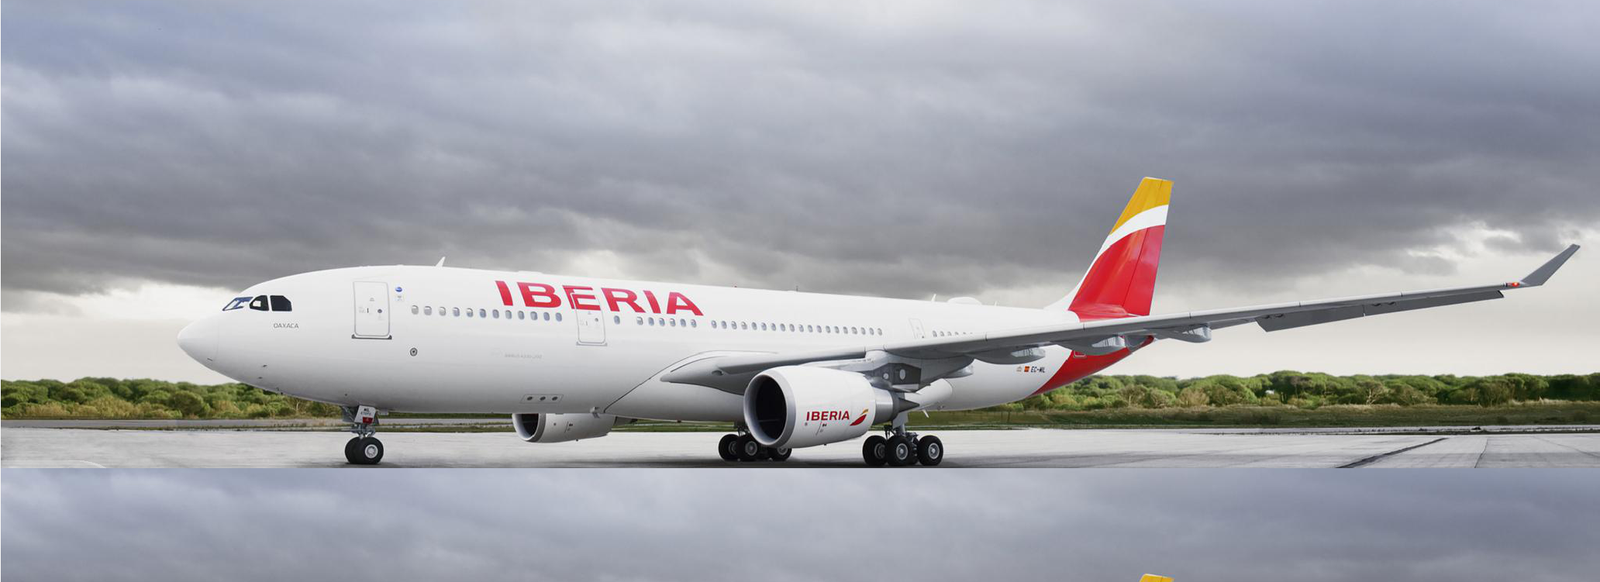 Iberia Airlines Colombia